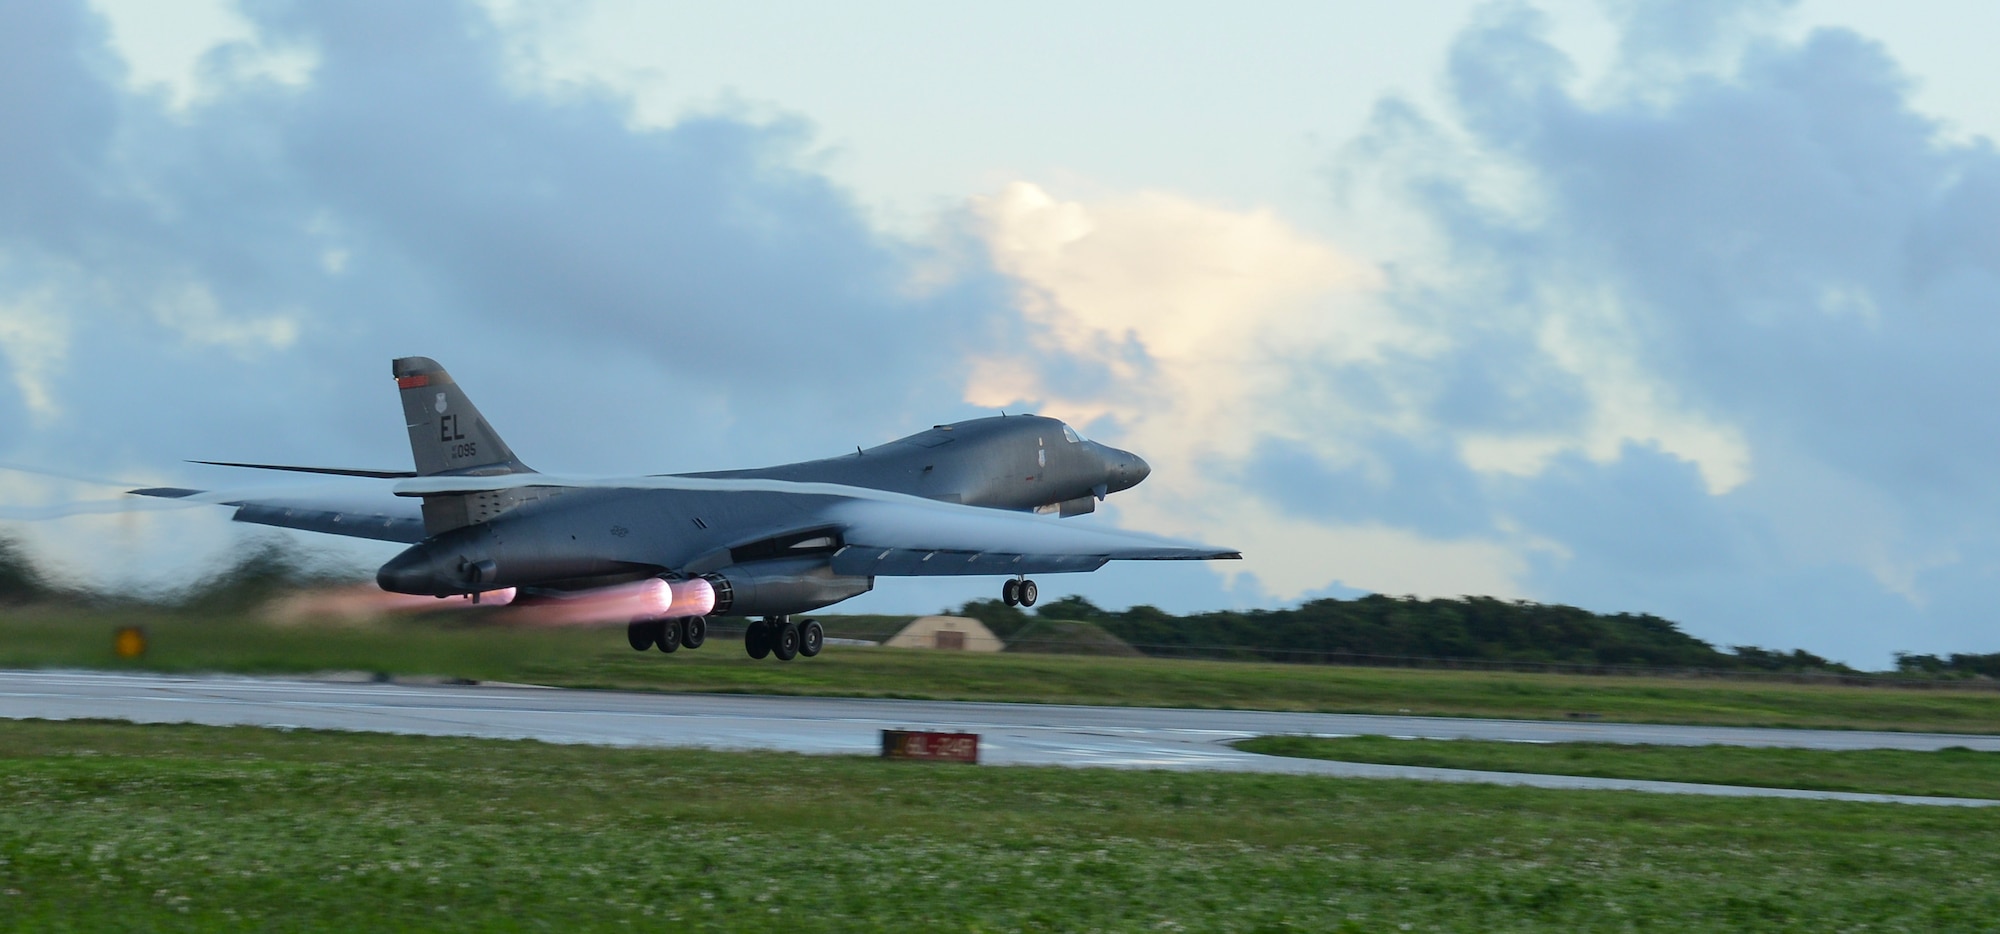 A U.S. Air Force B-1B Lancer assigned to the 34th Expeditionary Bomb Squadron, deployed from Ellsworth Air Force Base, S.D., takes off Oct. 25, 2016, at Andersen AFB, Guam. The aircraft is deployed in support of the U.S. Pacific Command’s Continuous Bomber Presence operations. (U.S. Air Force photo by Senior Airman Arielle Vasquez/Released)
